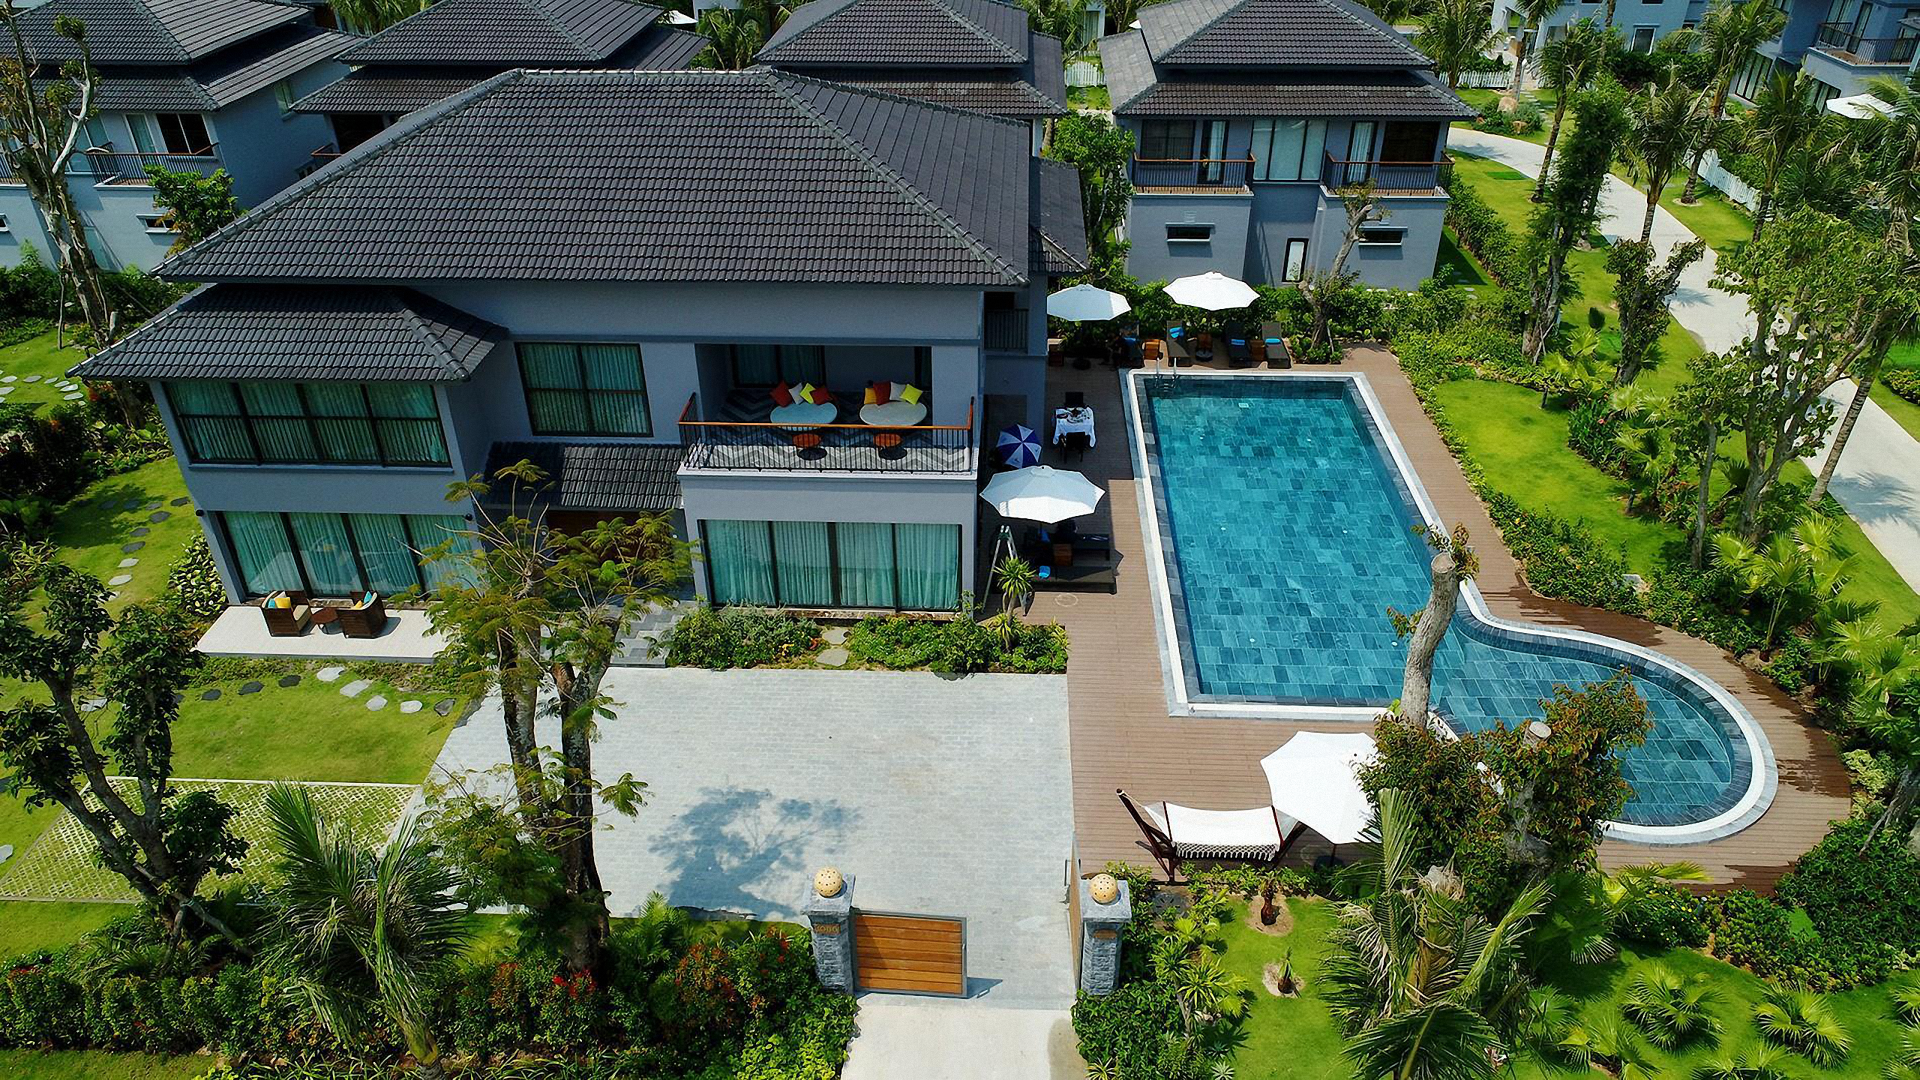 An aerial view of a large house with a large swimming pool surrounded by trees.